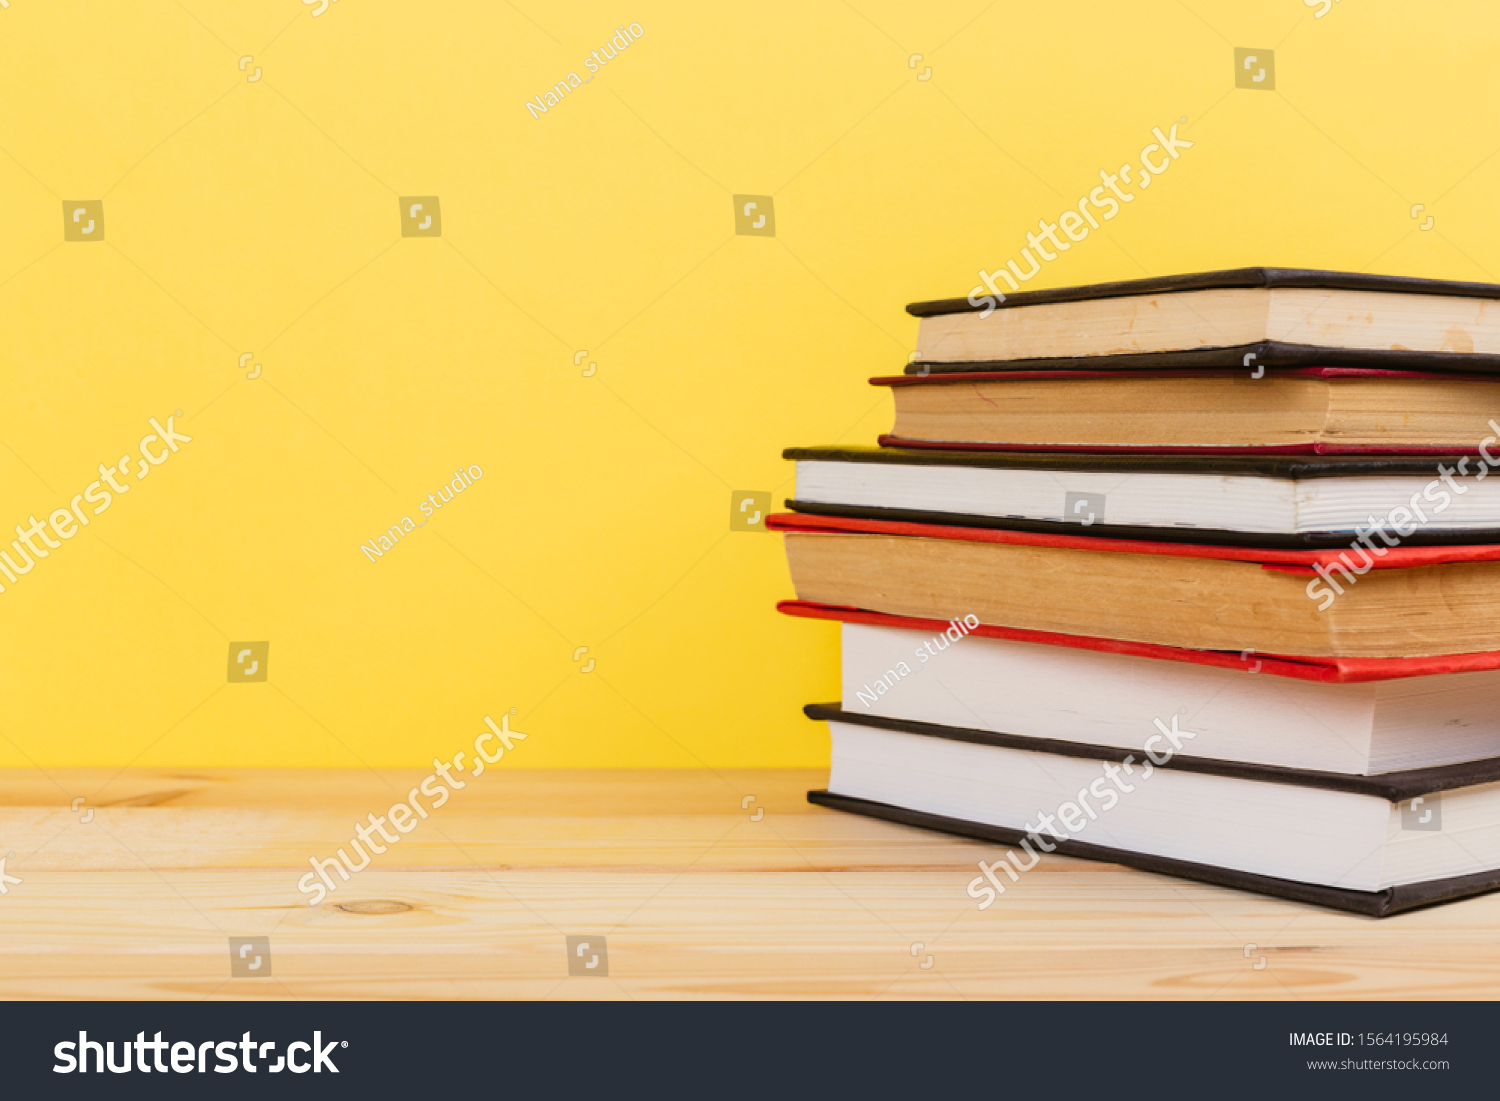 Simple Simple composition of many hardback books, unprocessed books on a wooden table and a yellow background. back to school. Copy space. Education. #1564195984